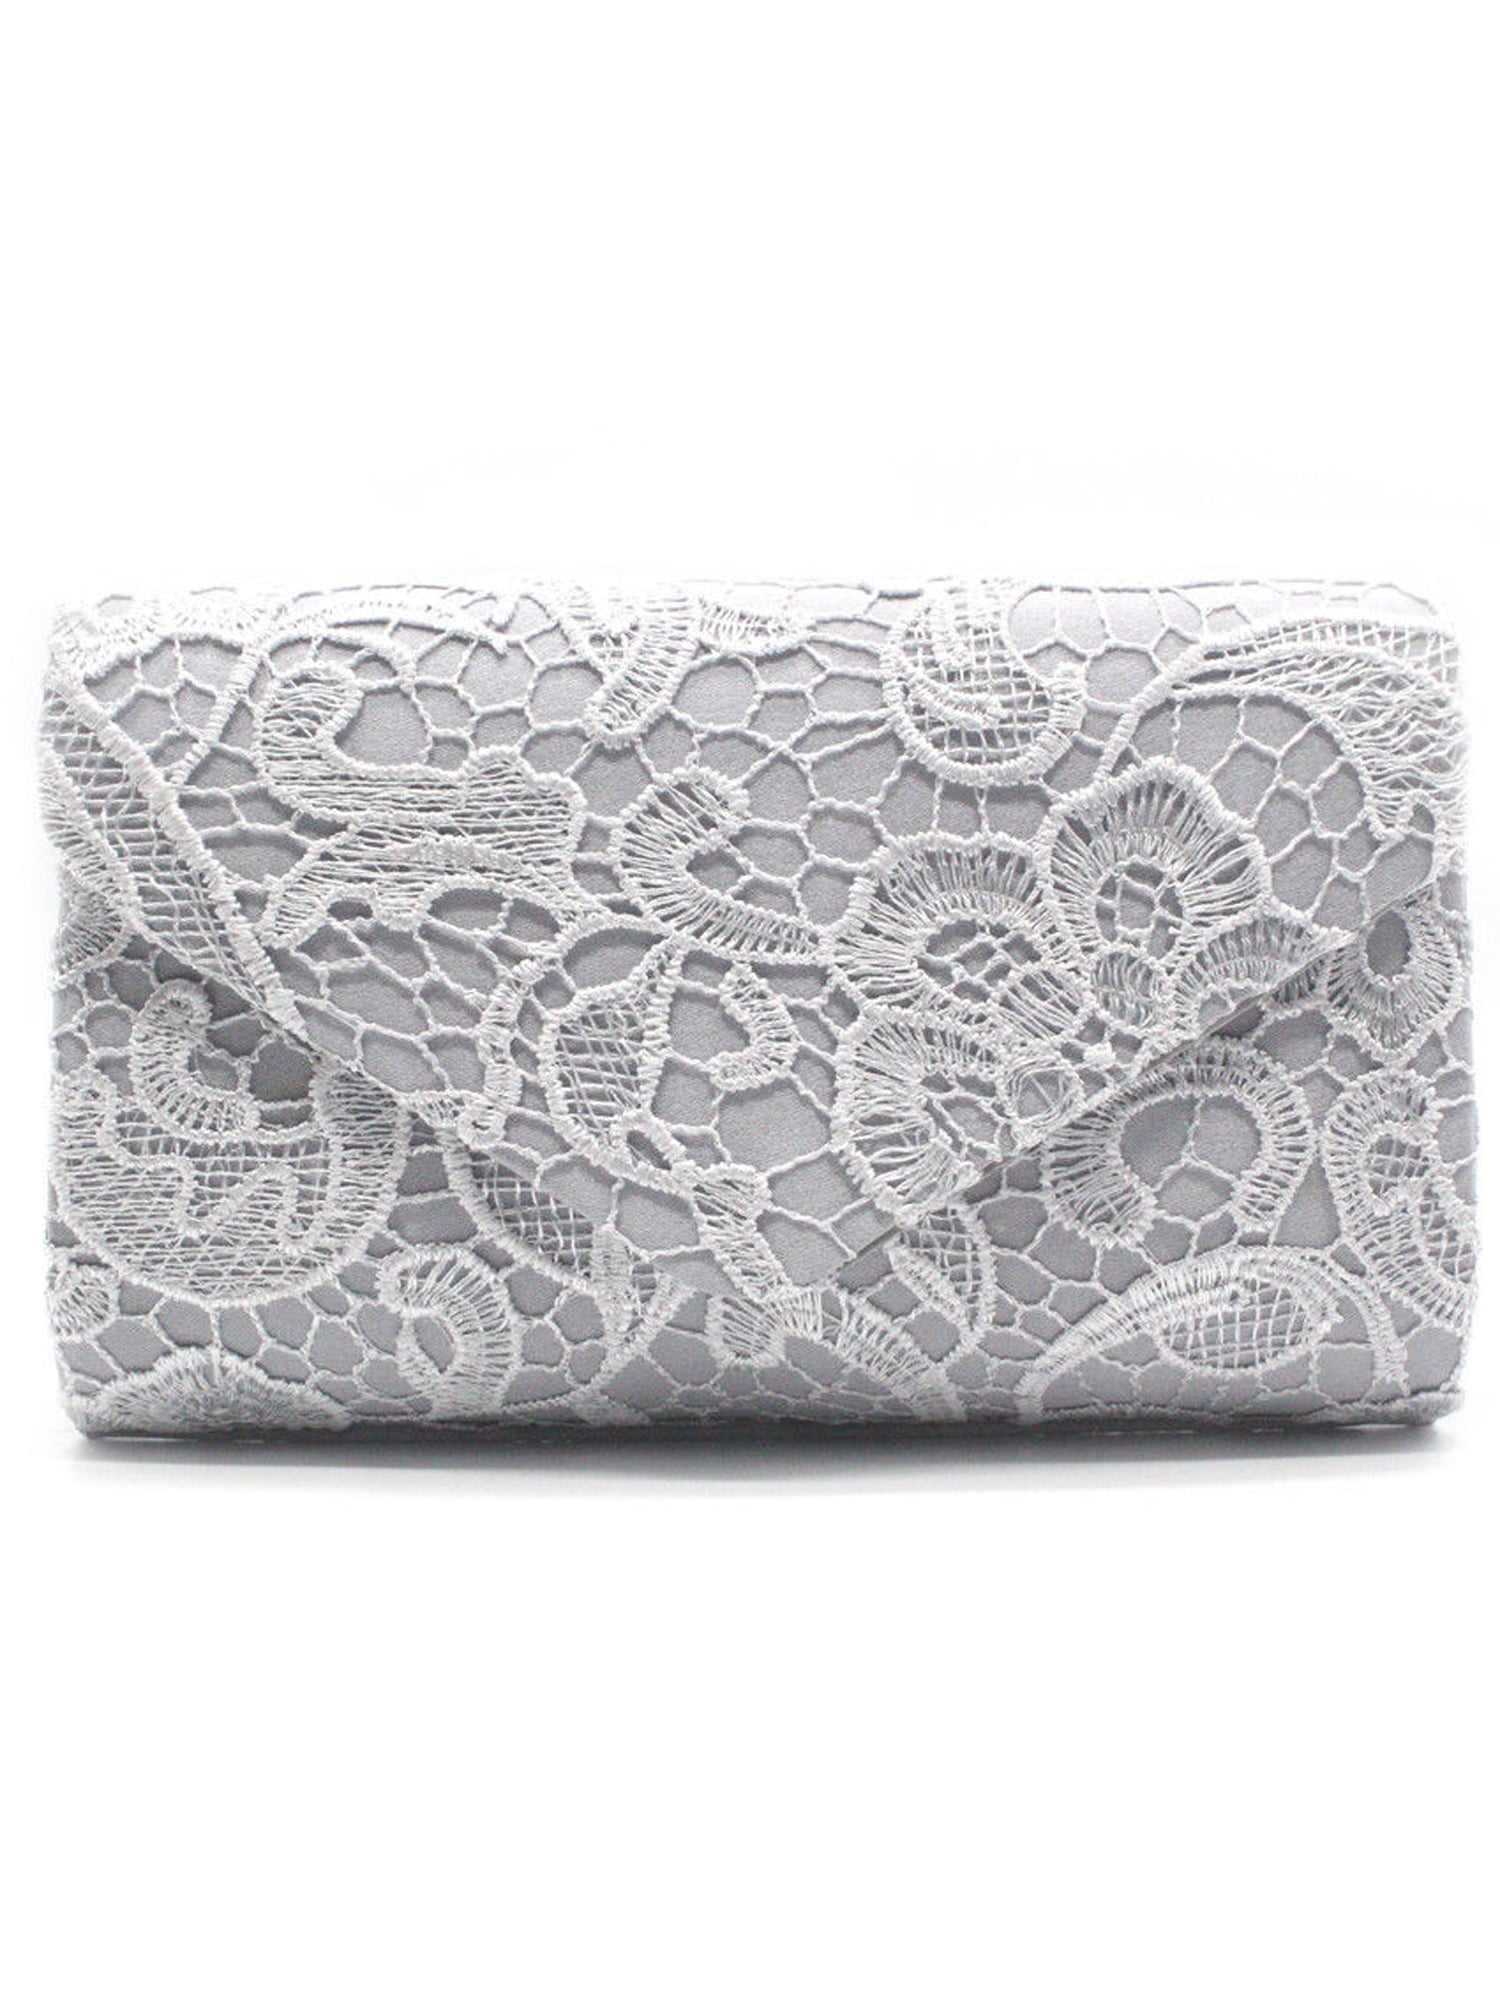 Women Messenger Flap Lace Stain Clutch Night Out Prom Party Shoulder Handbag 